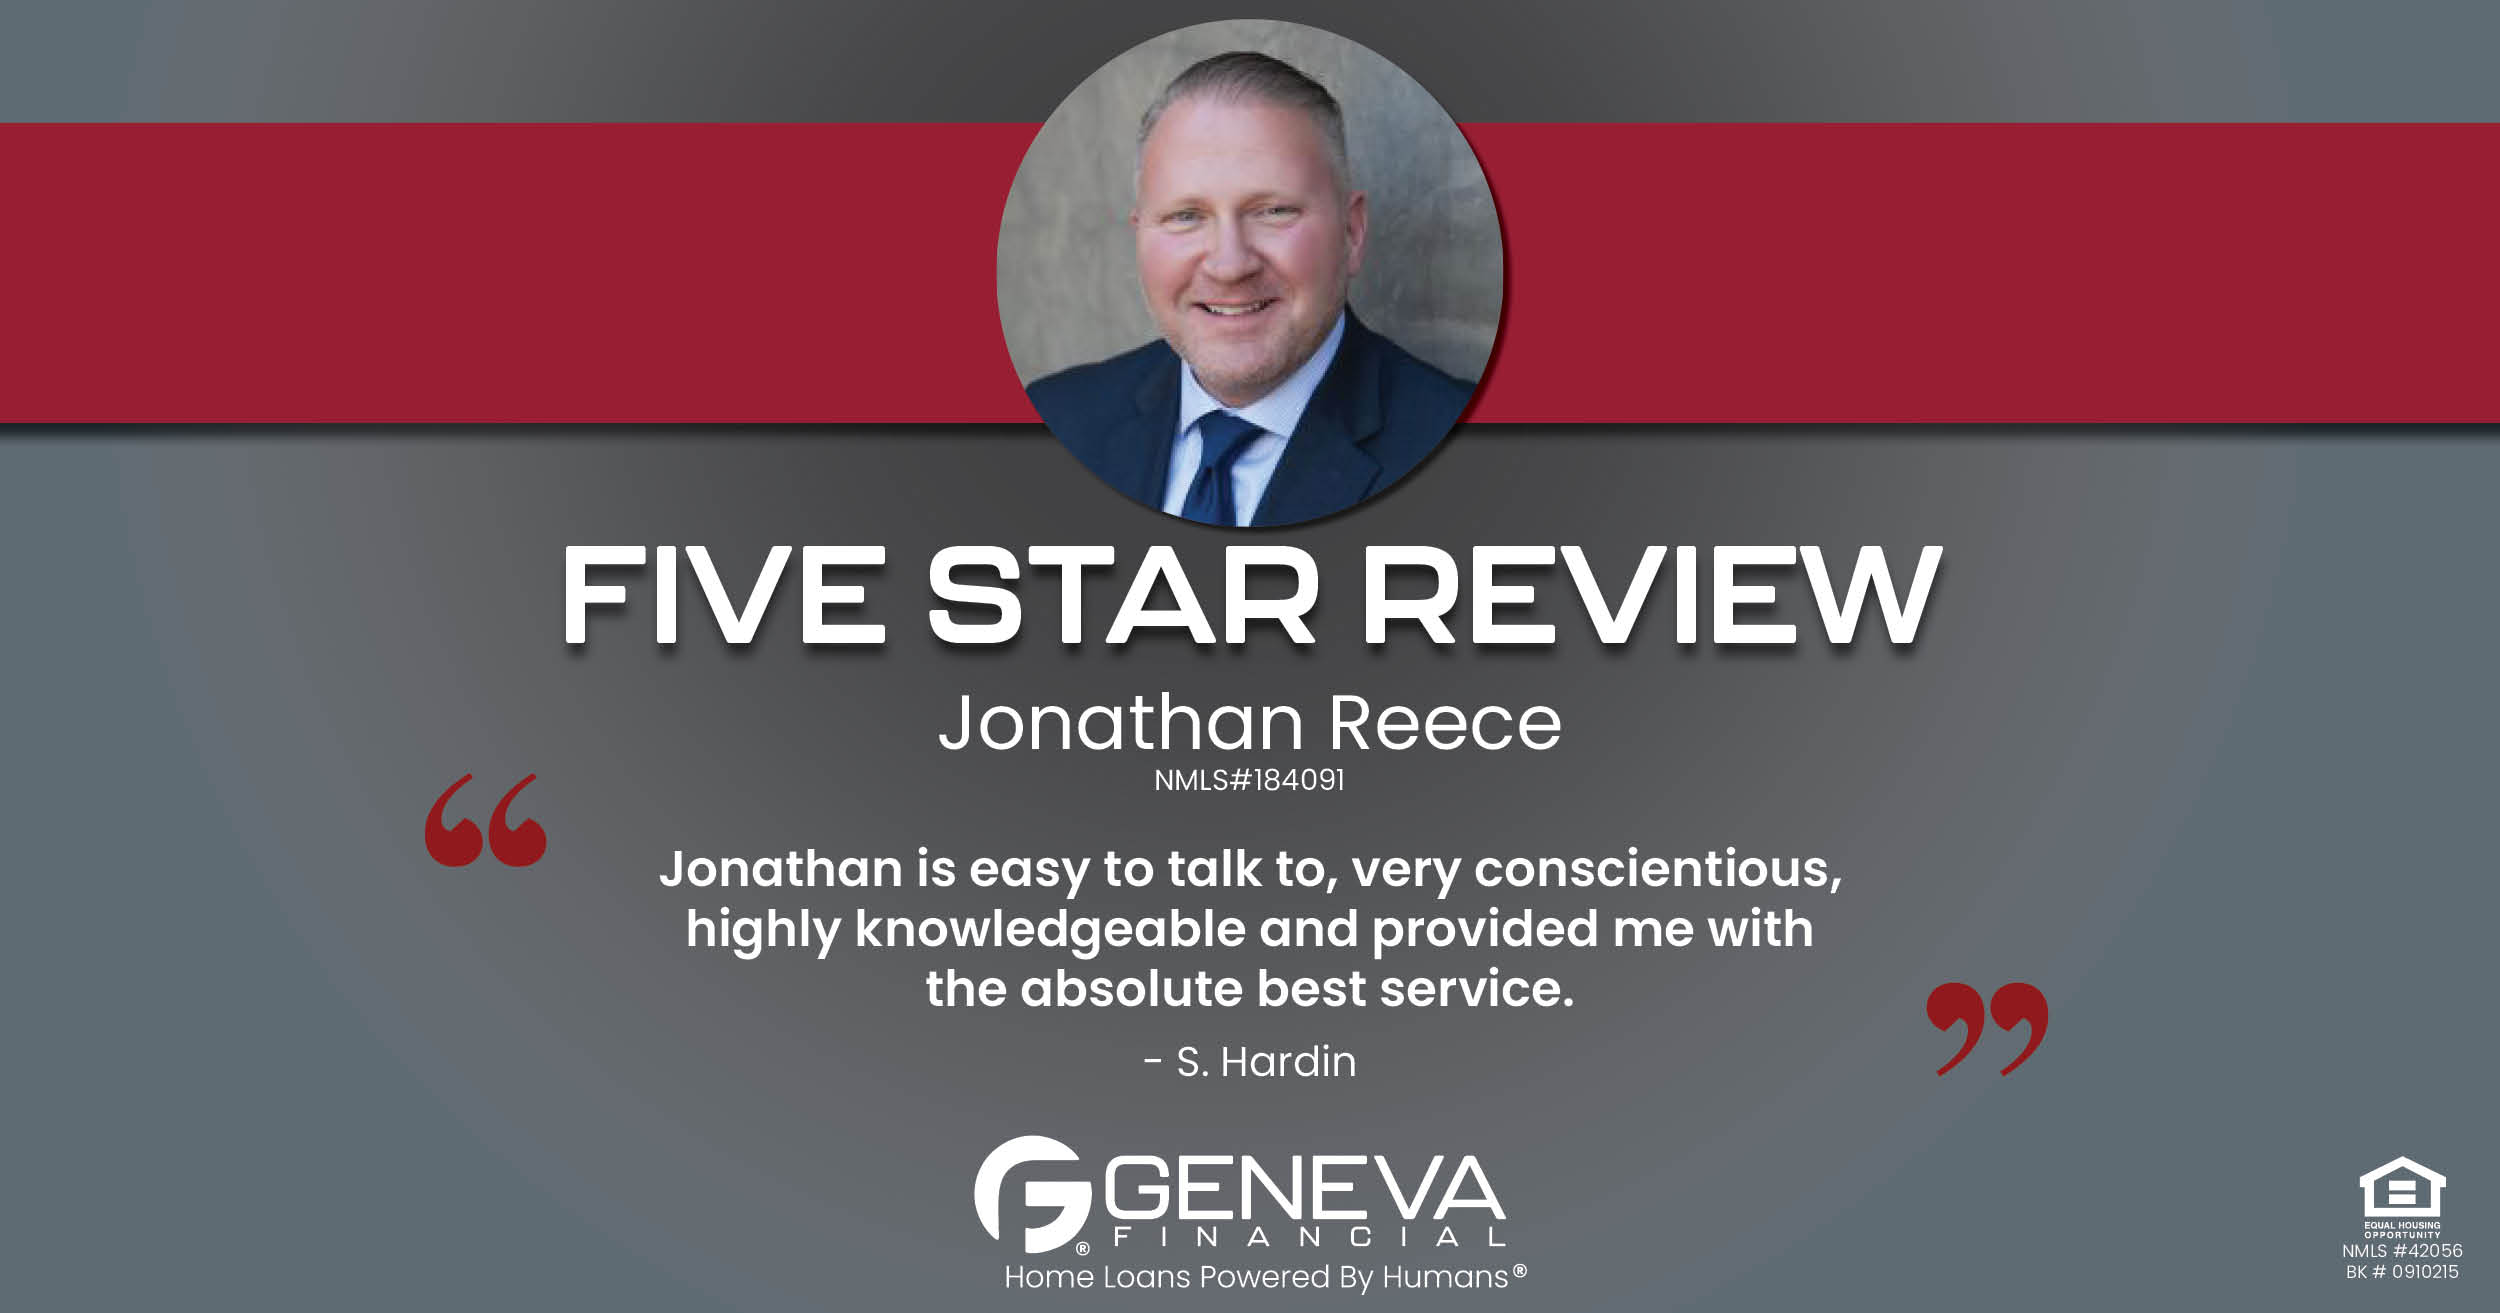 5 Star Review for Jonathan Reece, Licensed Mortgage Loan Officer with Geneva Financial, Tempe, Arizona – Home Loans Powered by Humans®.